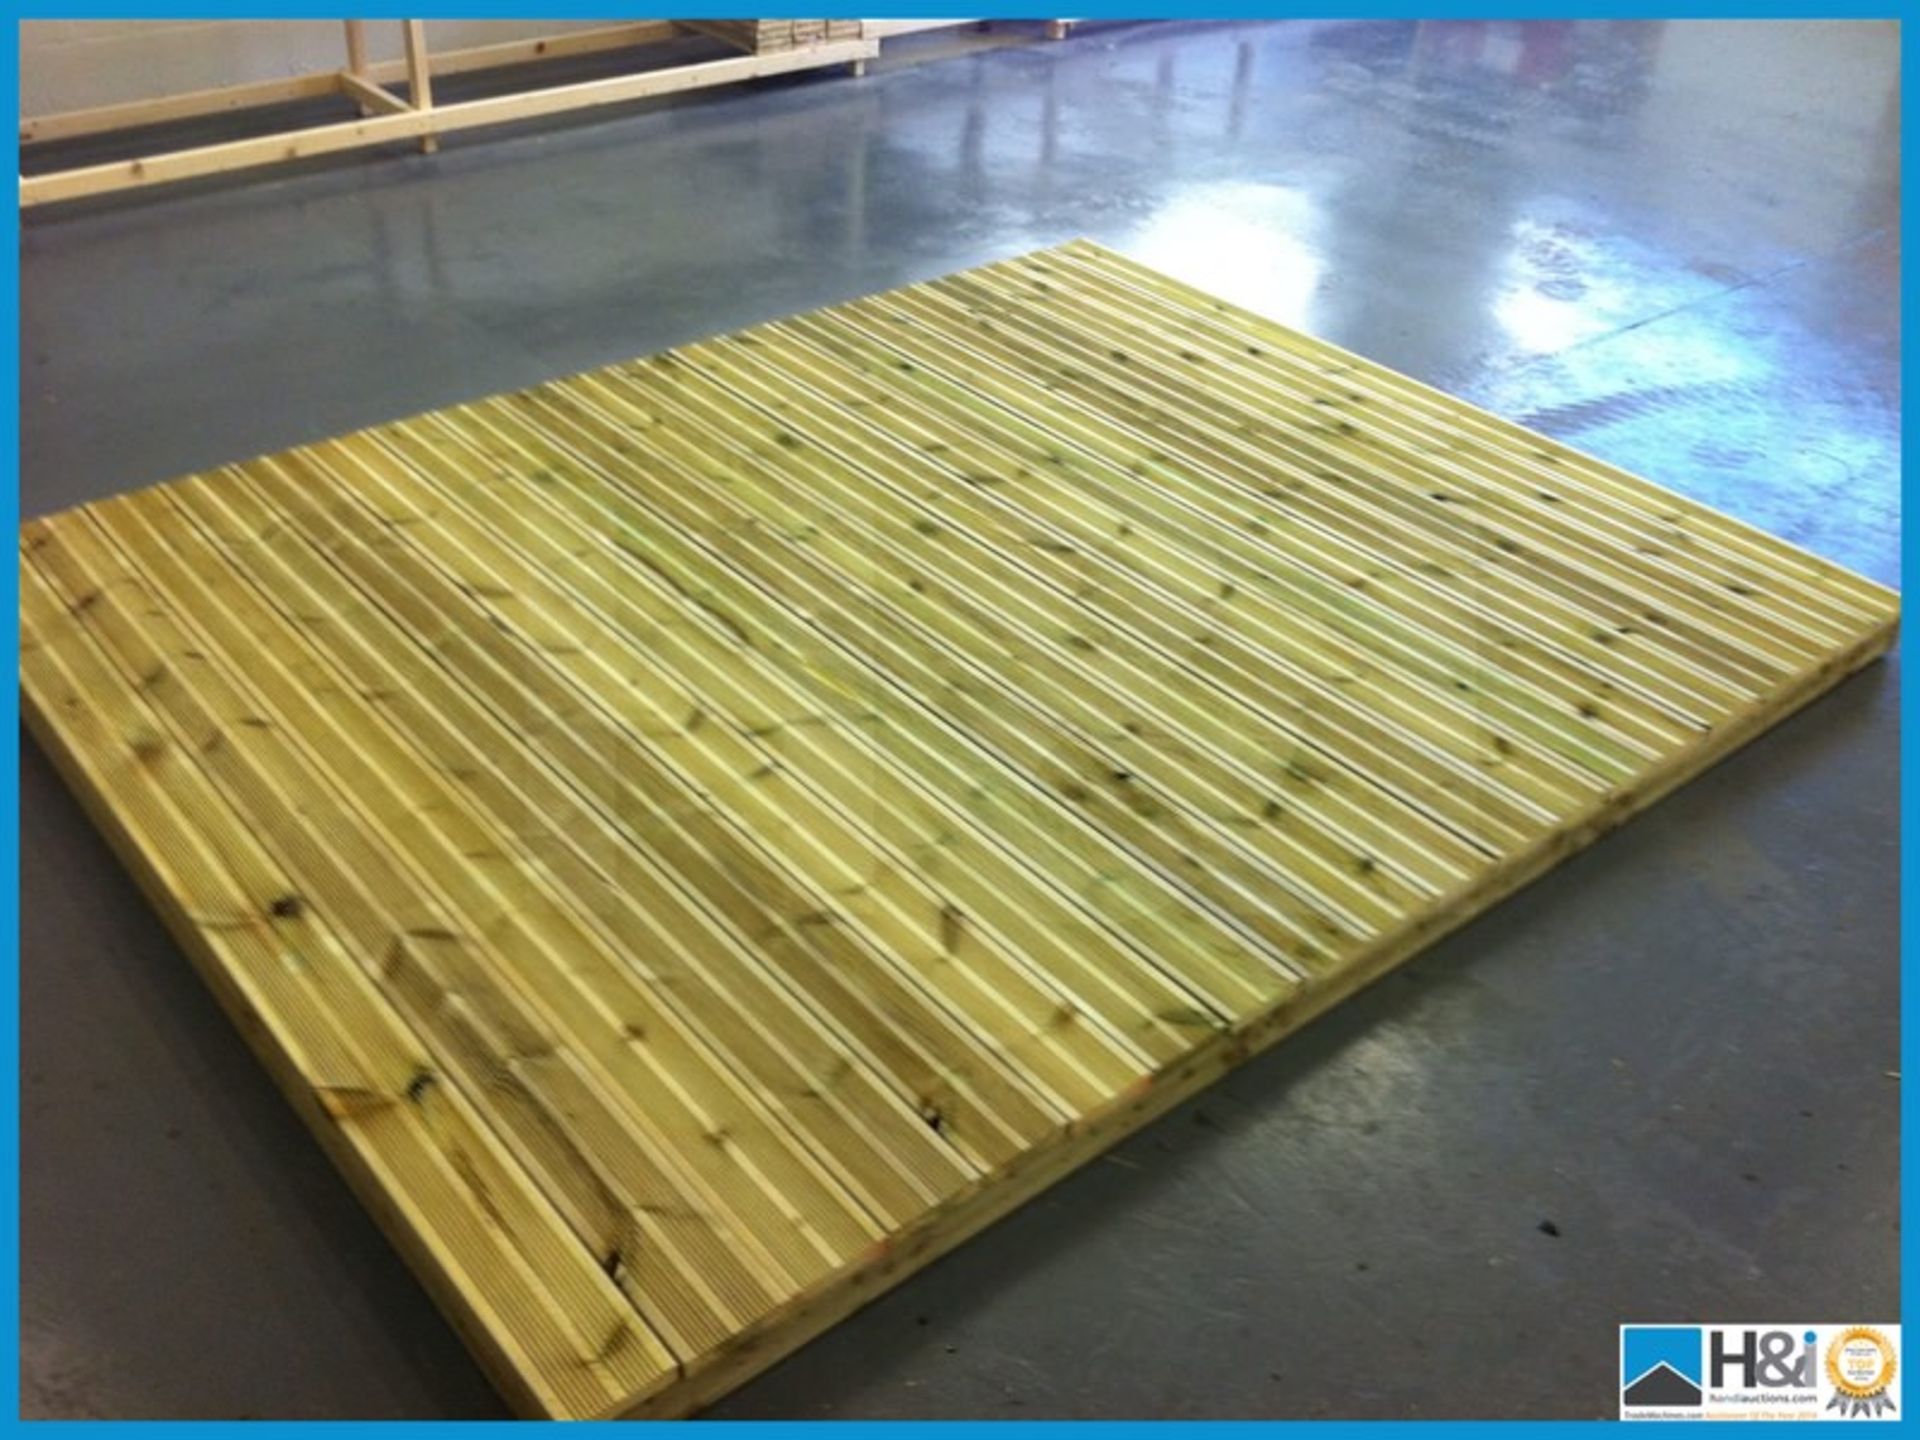 Tanalised 2.4 x 3.0 Heavy Duty Decking Kit. All 32x125 decking cut to length with side fascia's - Image 5 of 12